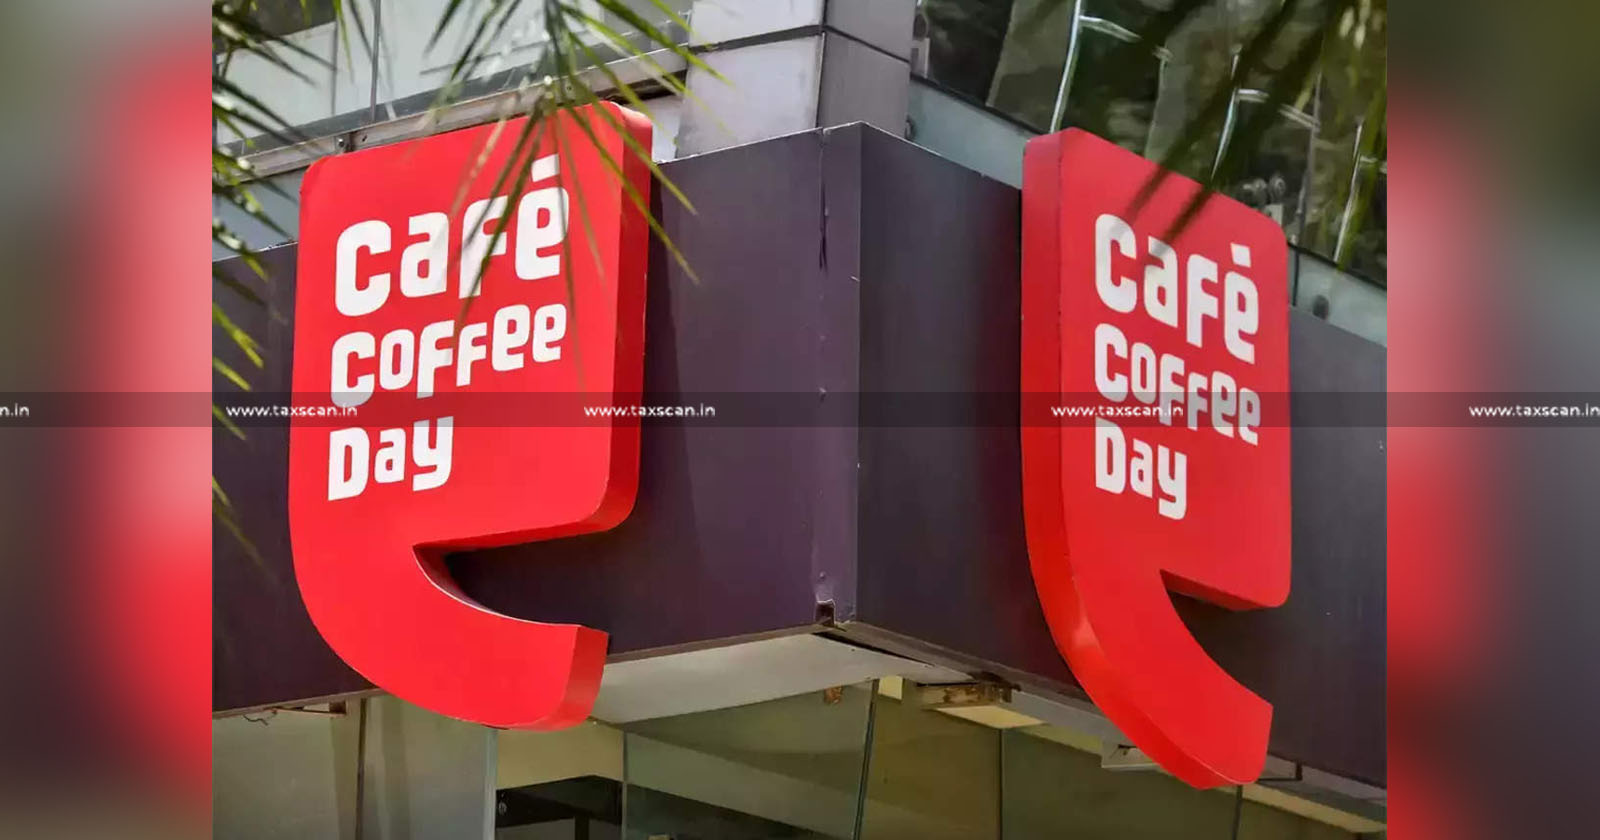 NFRA Imposes Fine of Rupees 2.15 Crores - NFRA - NFRA Imposes Fine of Rupees 2.15 Crores on Statutory Auditors - Coffee Day Global Limited - Taxscan